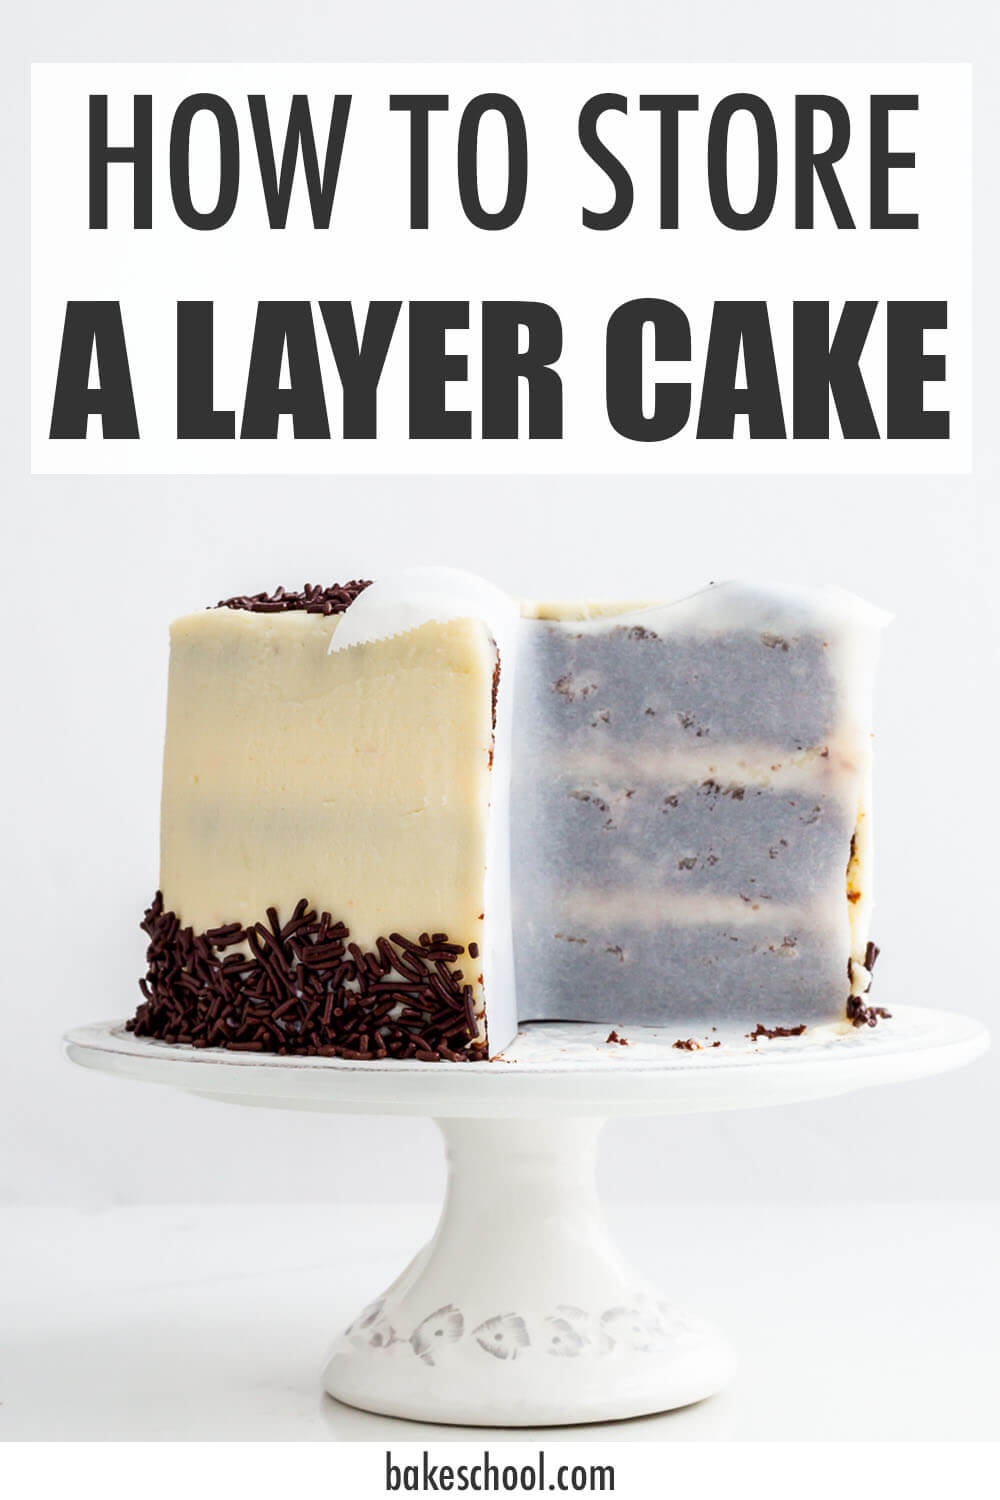 A layer cake on a cake stand, with parchment paper pressed up on the cut sides of the cake to help prevent drying.